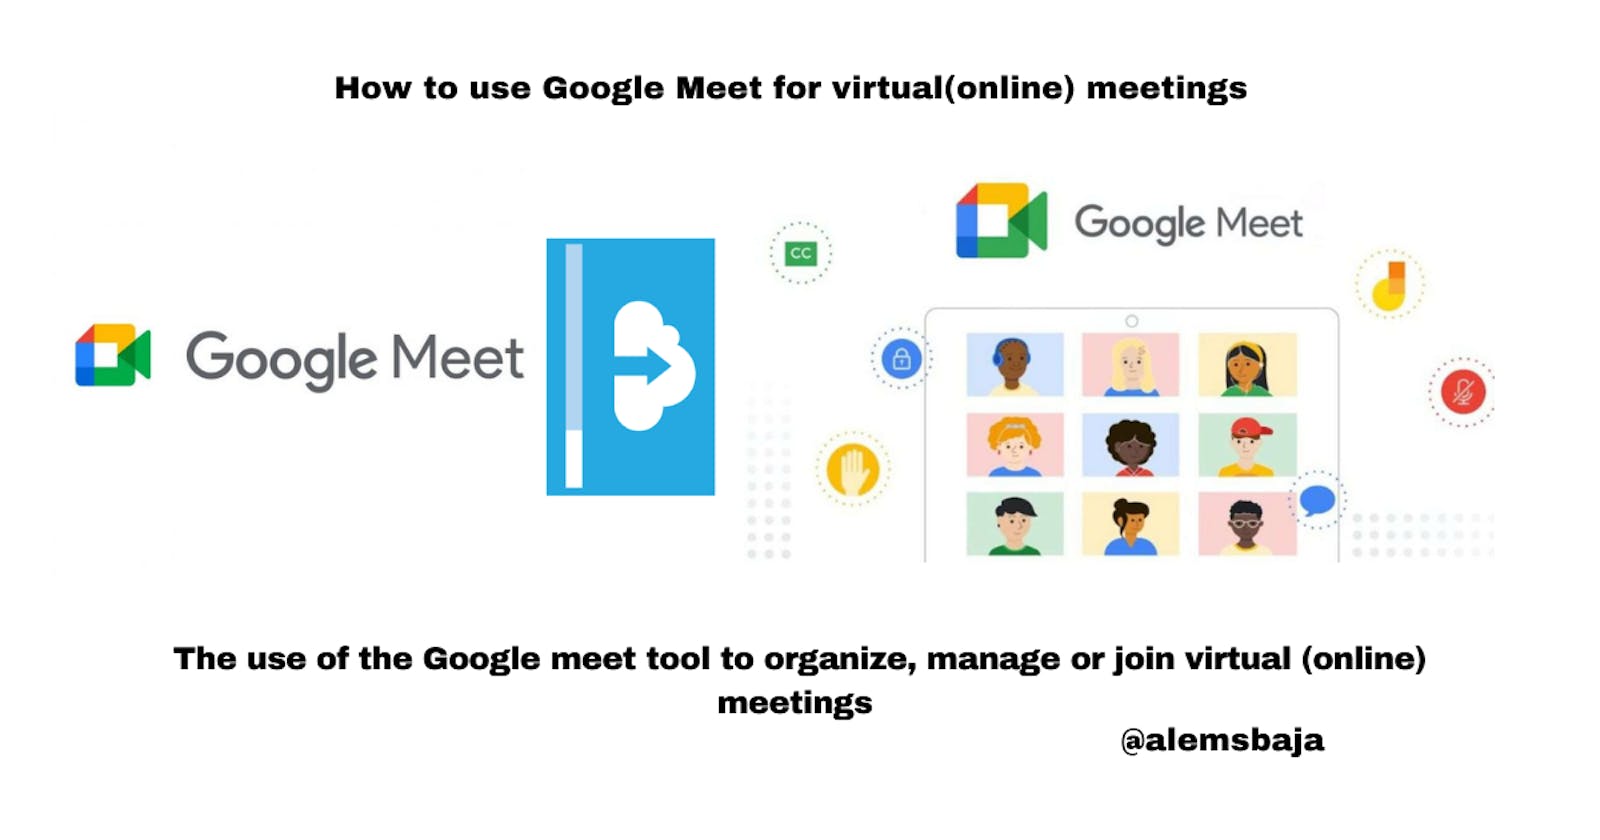 How to use Google Meet for virtual (online) meetings